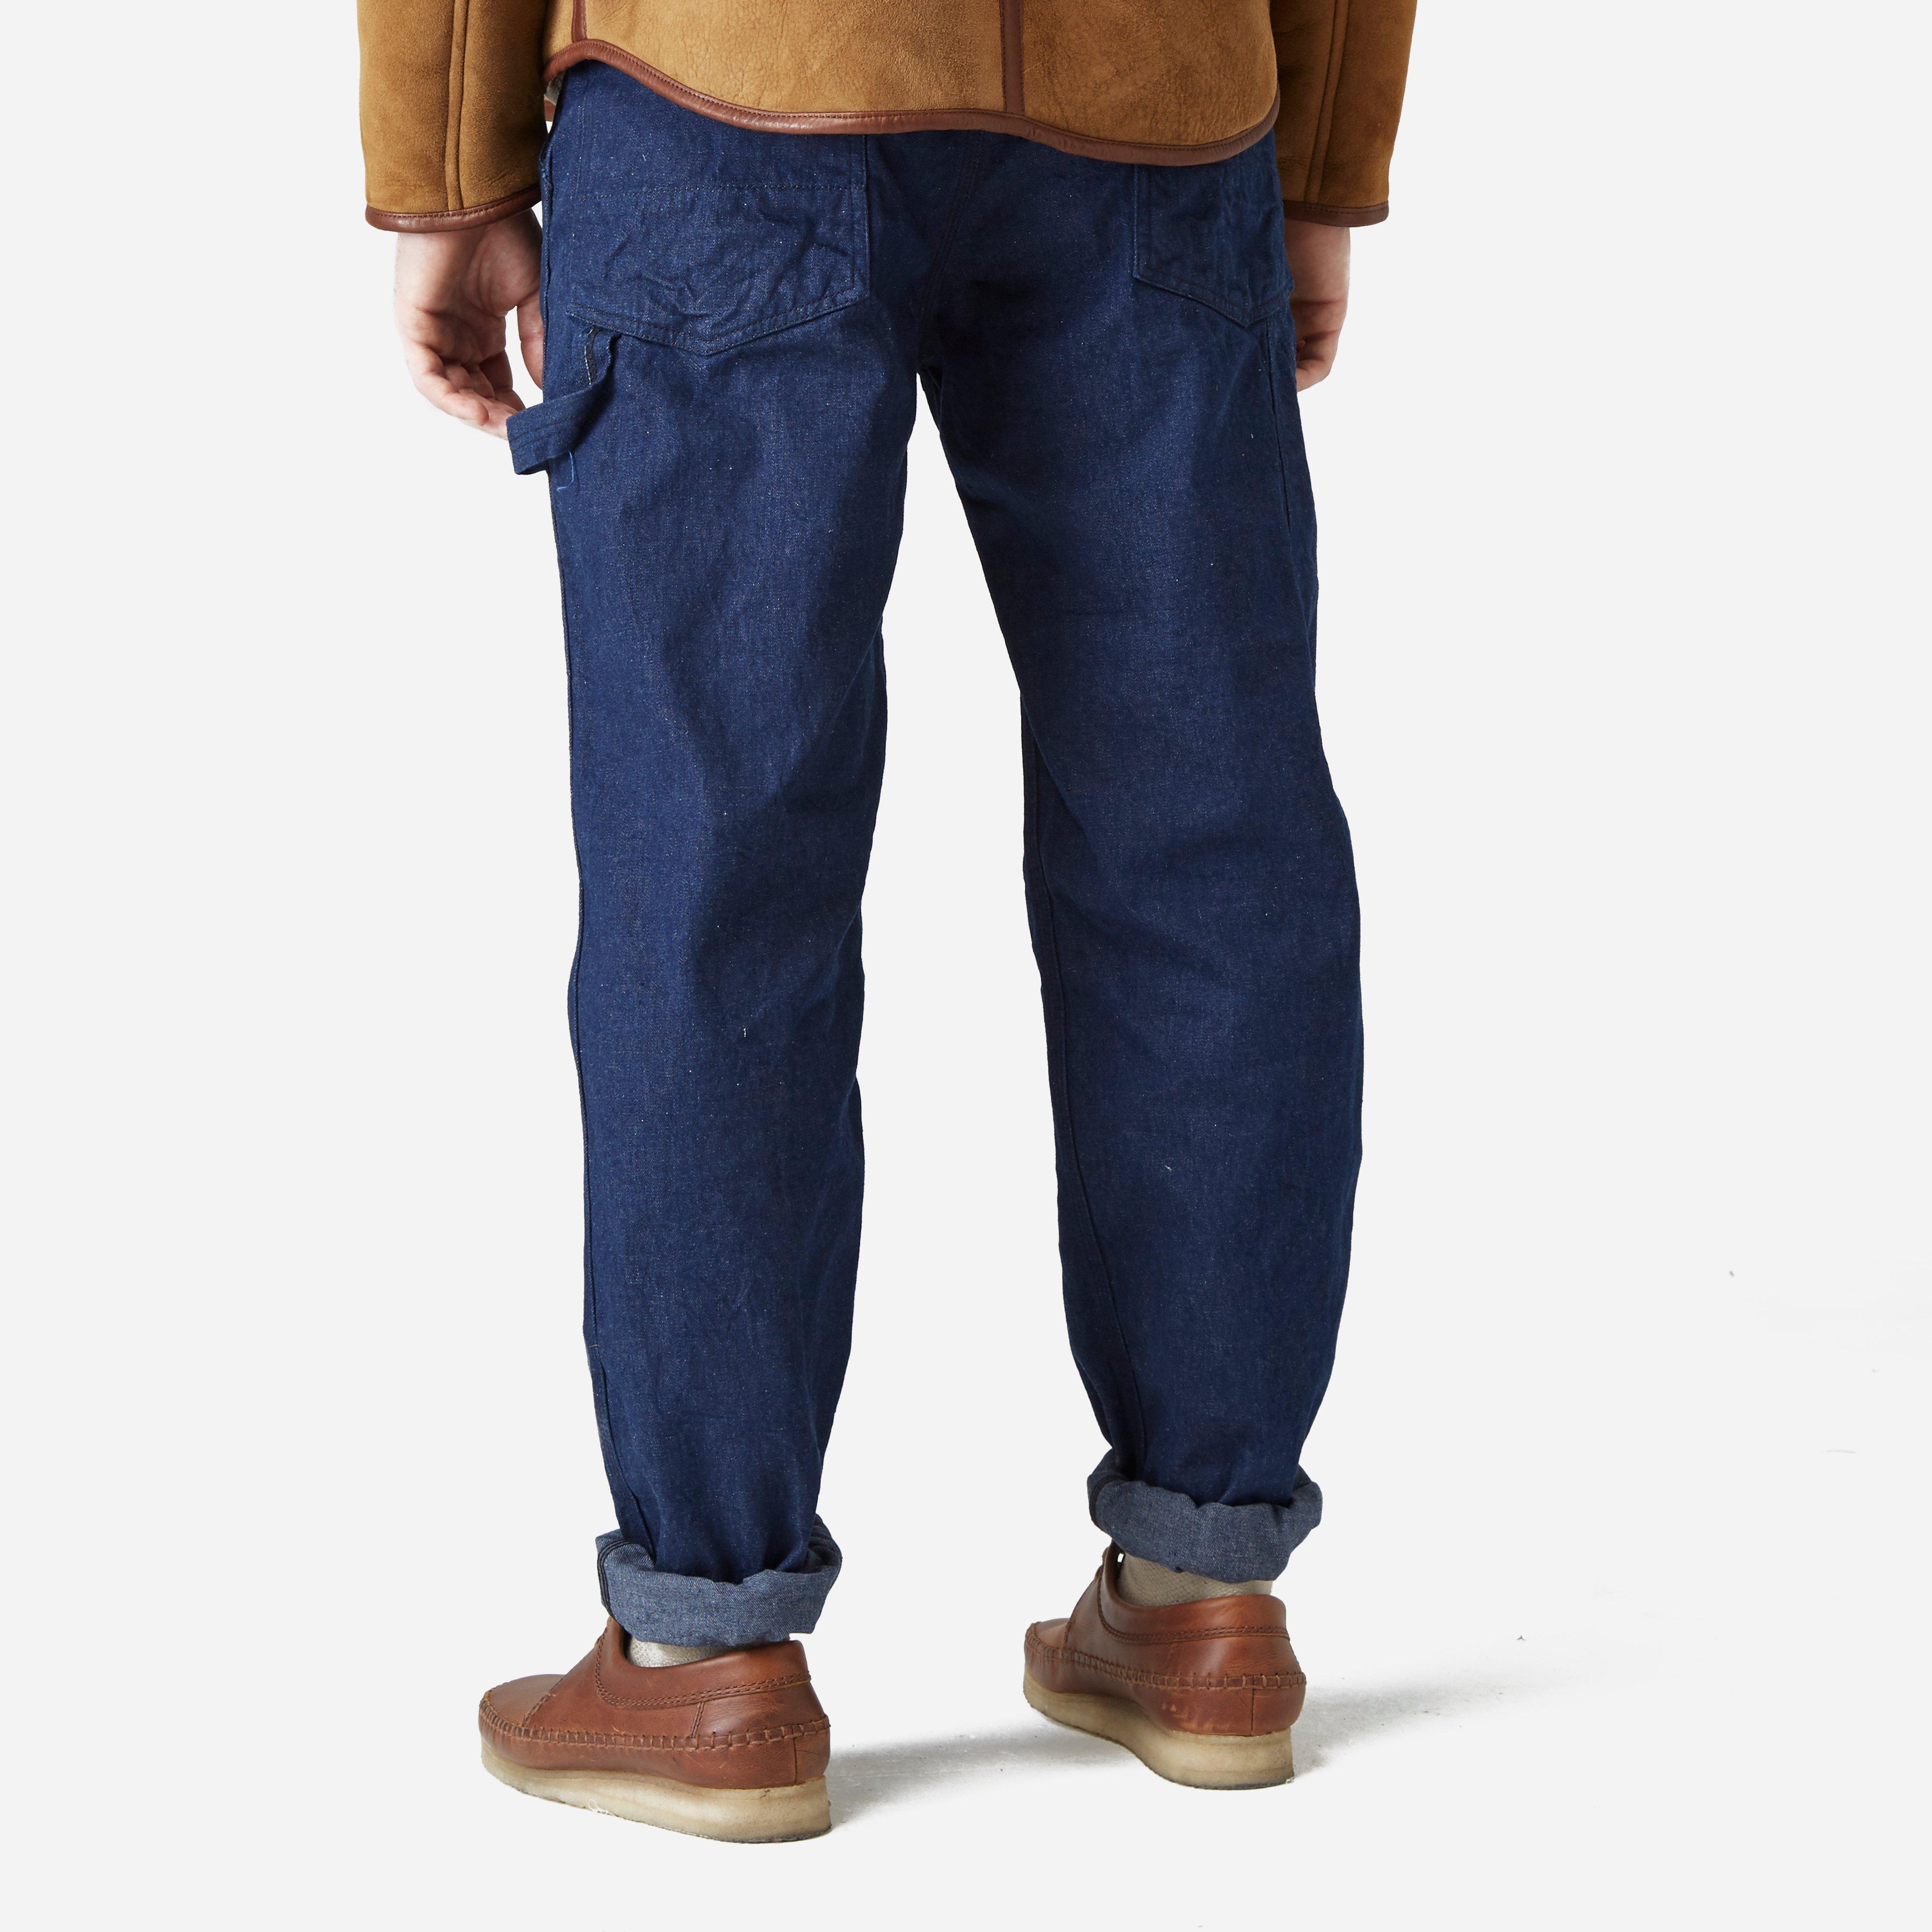 Lyst - Engineered Garments Logger Pant - 11oz Cone Denim in Blue for Men